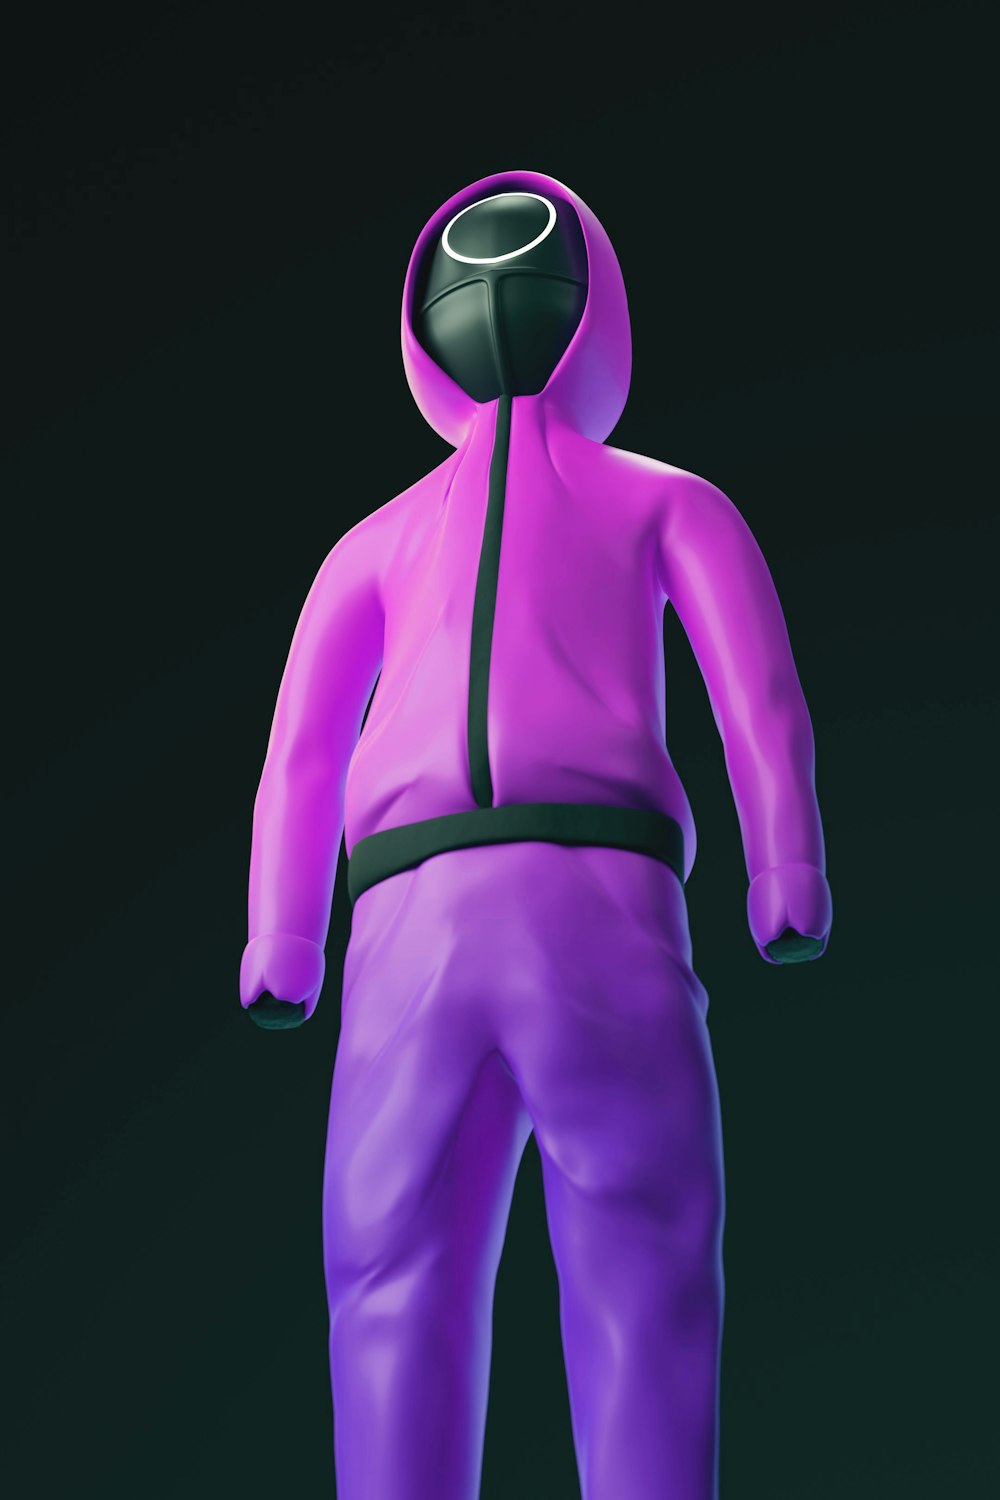 a person in a purple suit with a black hood